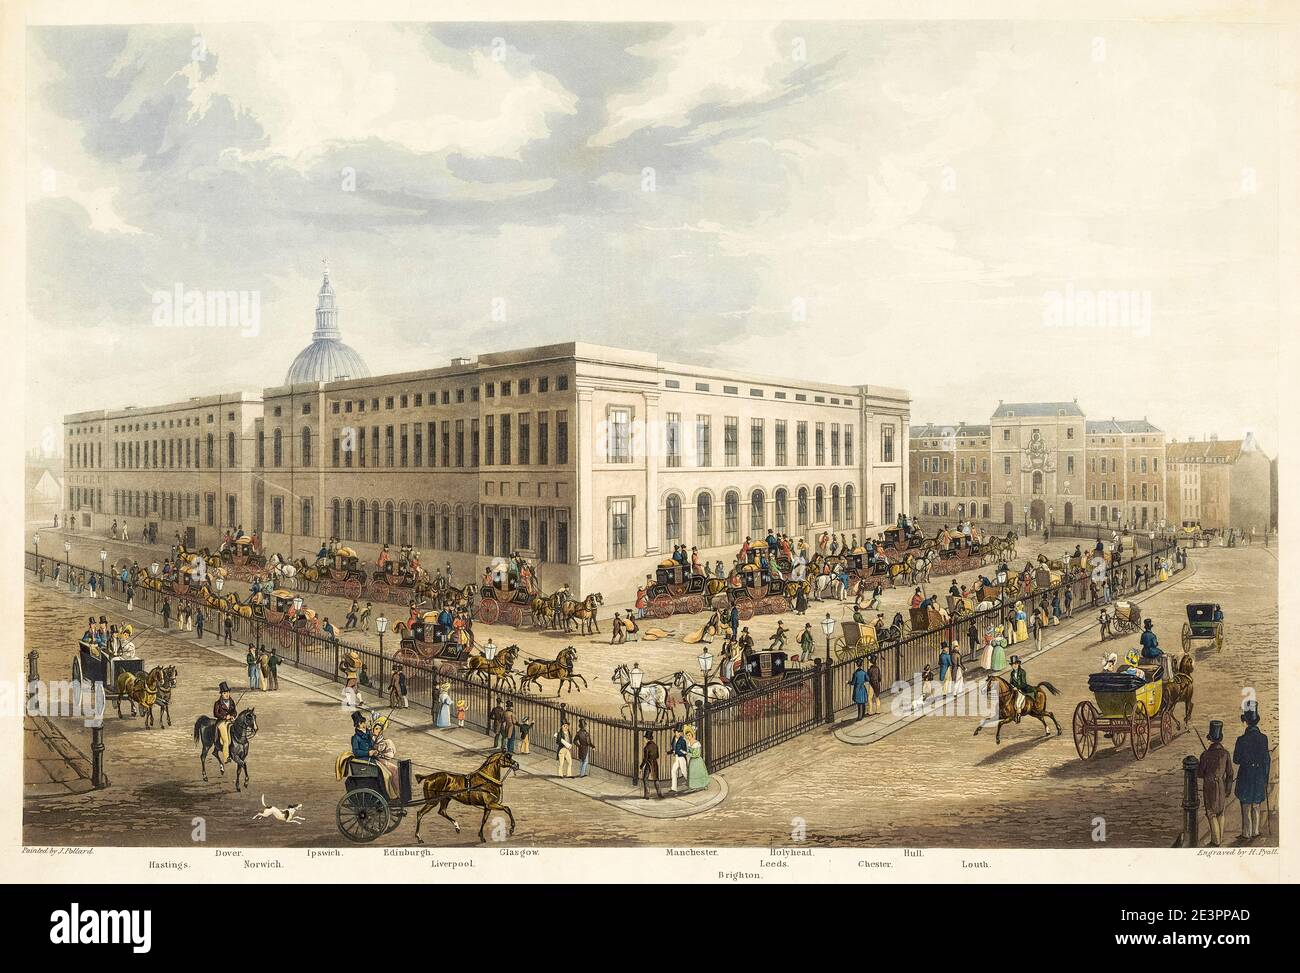 A North East View of the General Post Office with the Royal Mail coaches (and carts) preparandosi a iniziare, acquatint stampa di Henry Pyall, dopo James Pollard, 1832 Foto Stock